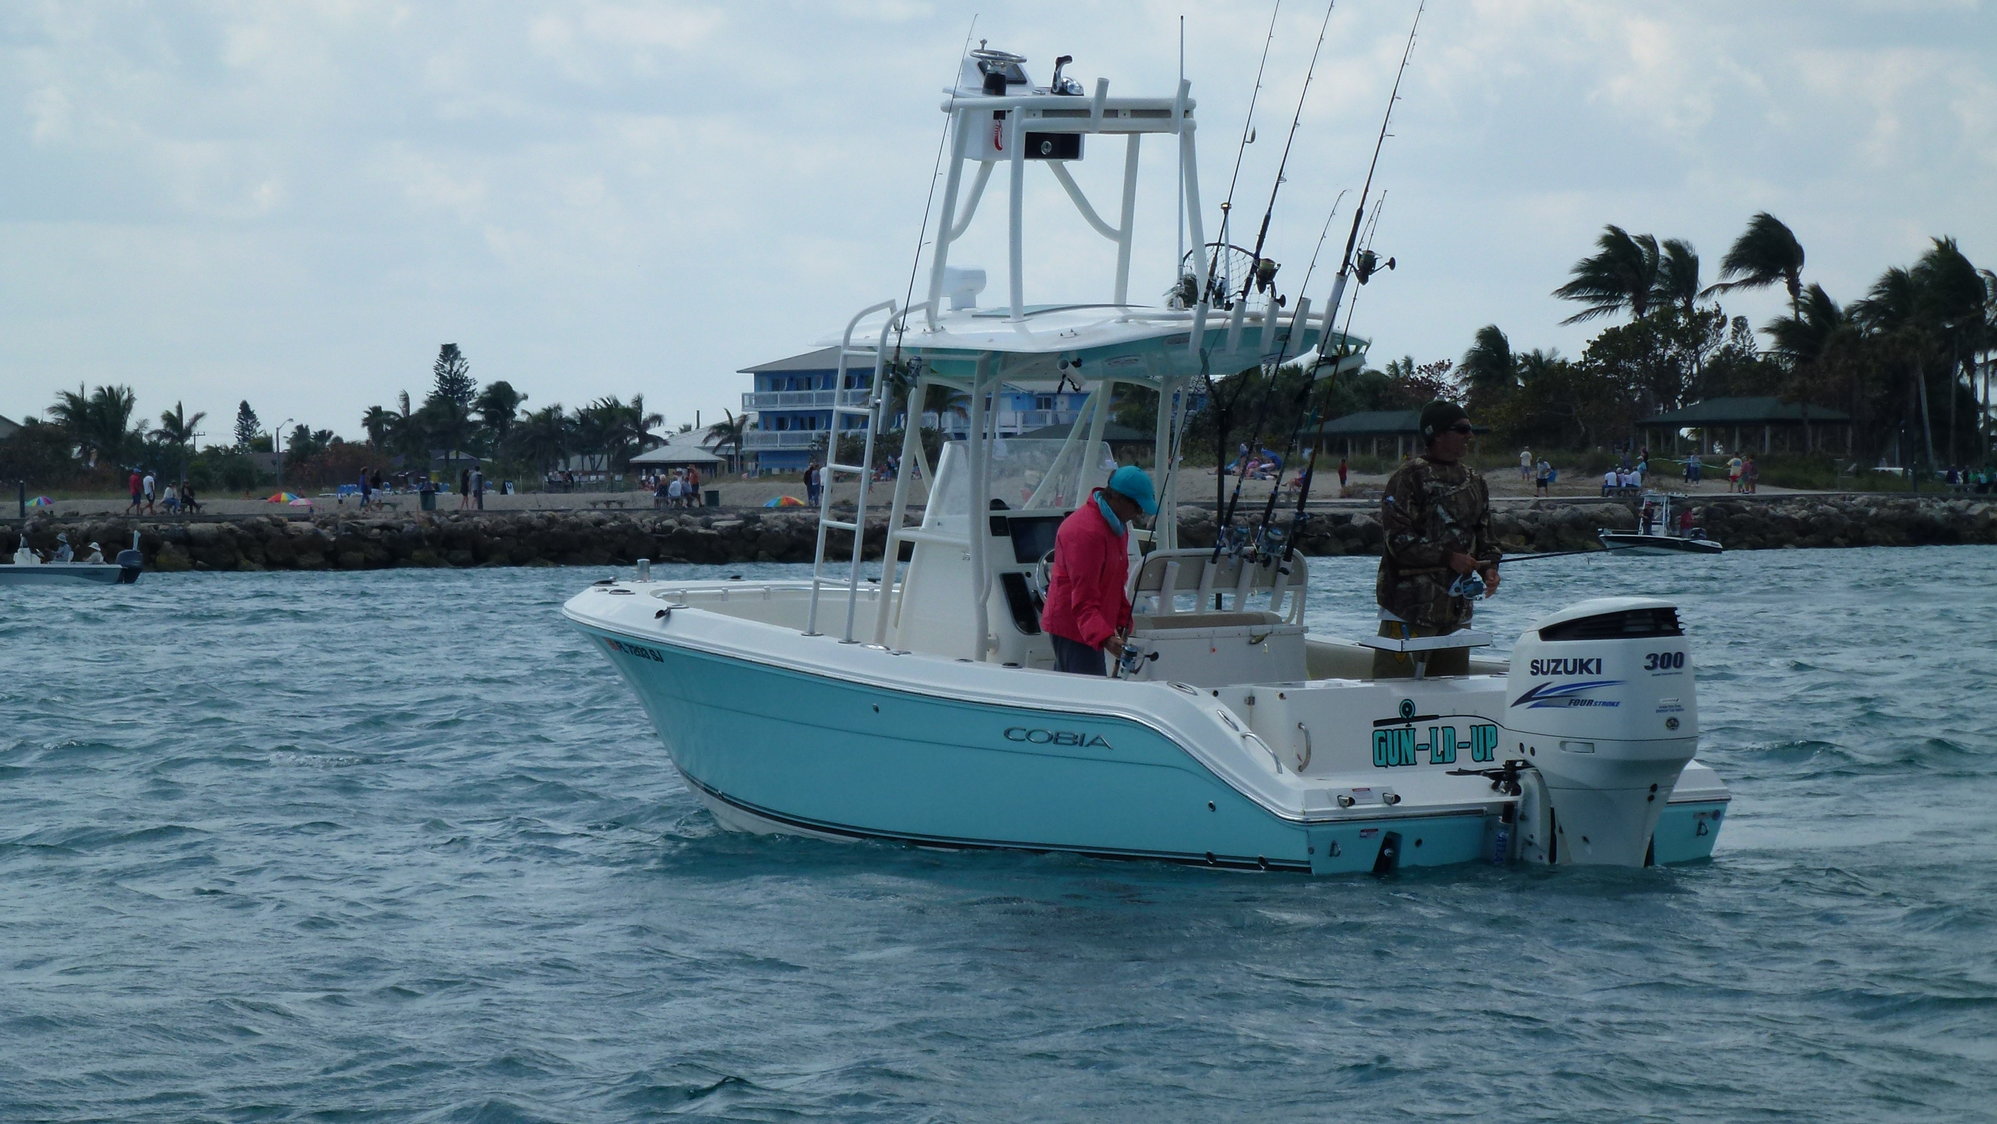 Radar or Stand through Second Station for offshore fishing? - The